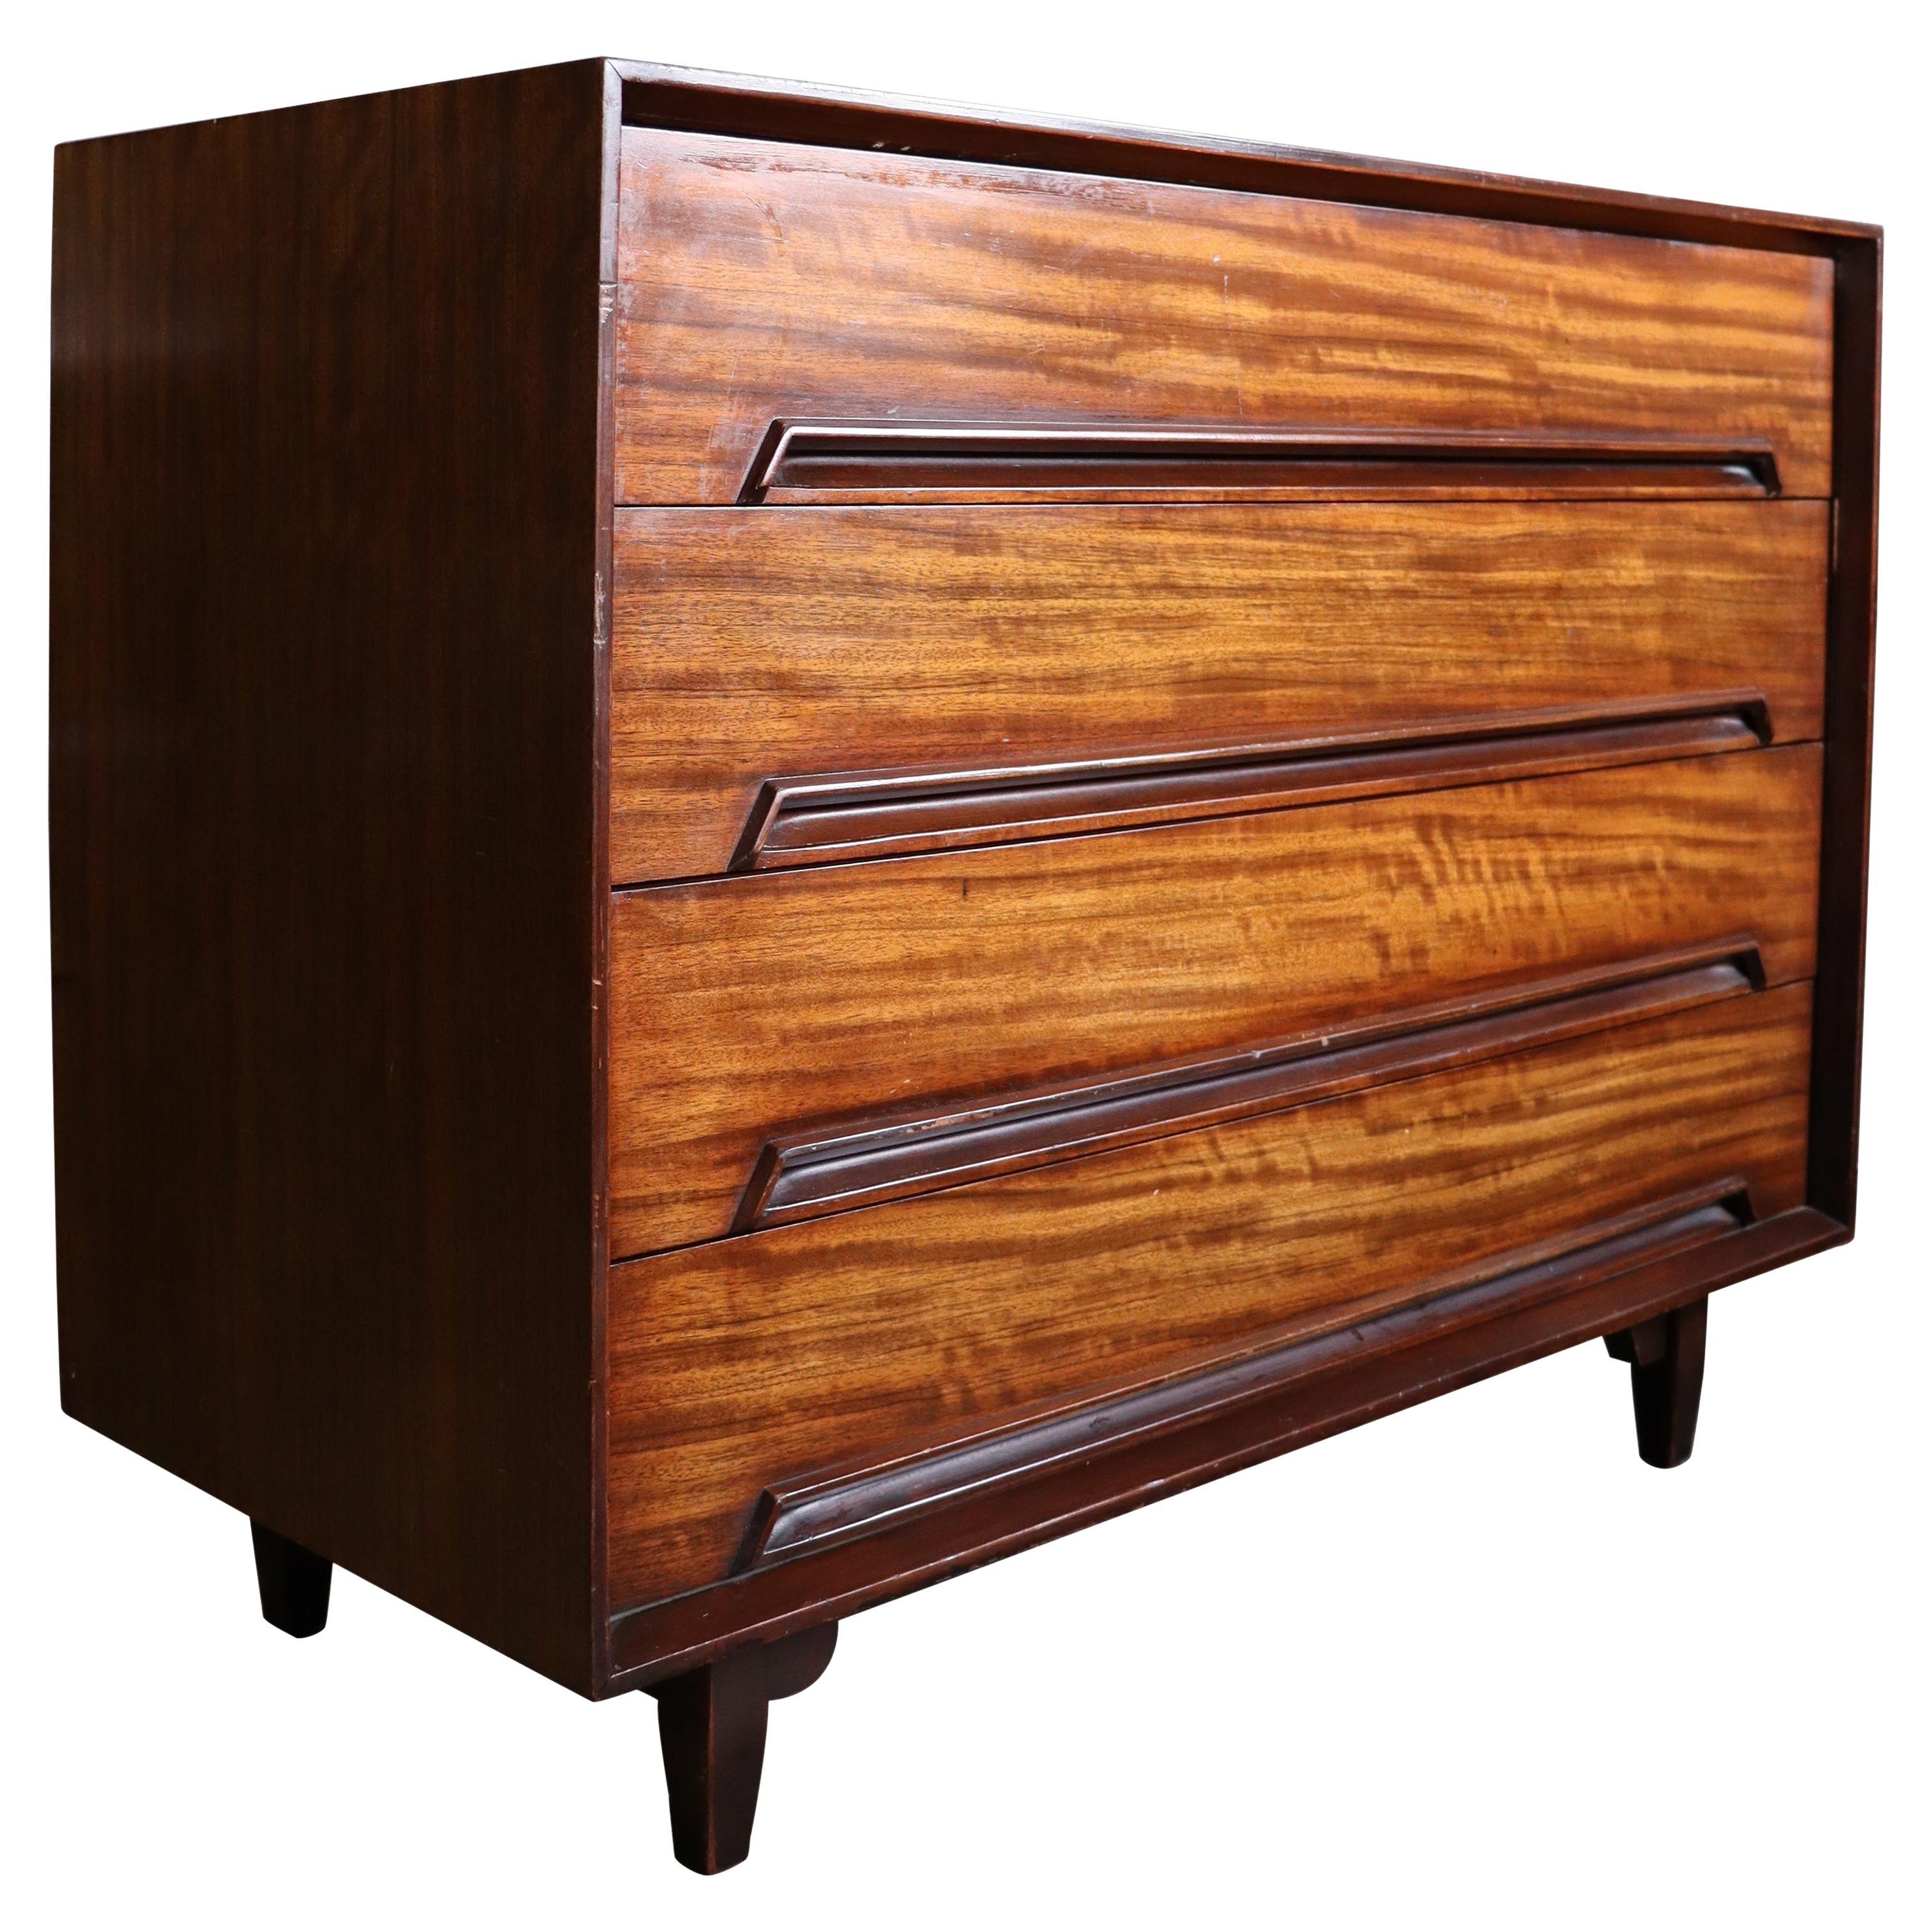 Midcentury Milo Baughman Chest of Drawers - Perspective for Drexel